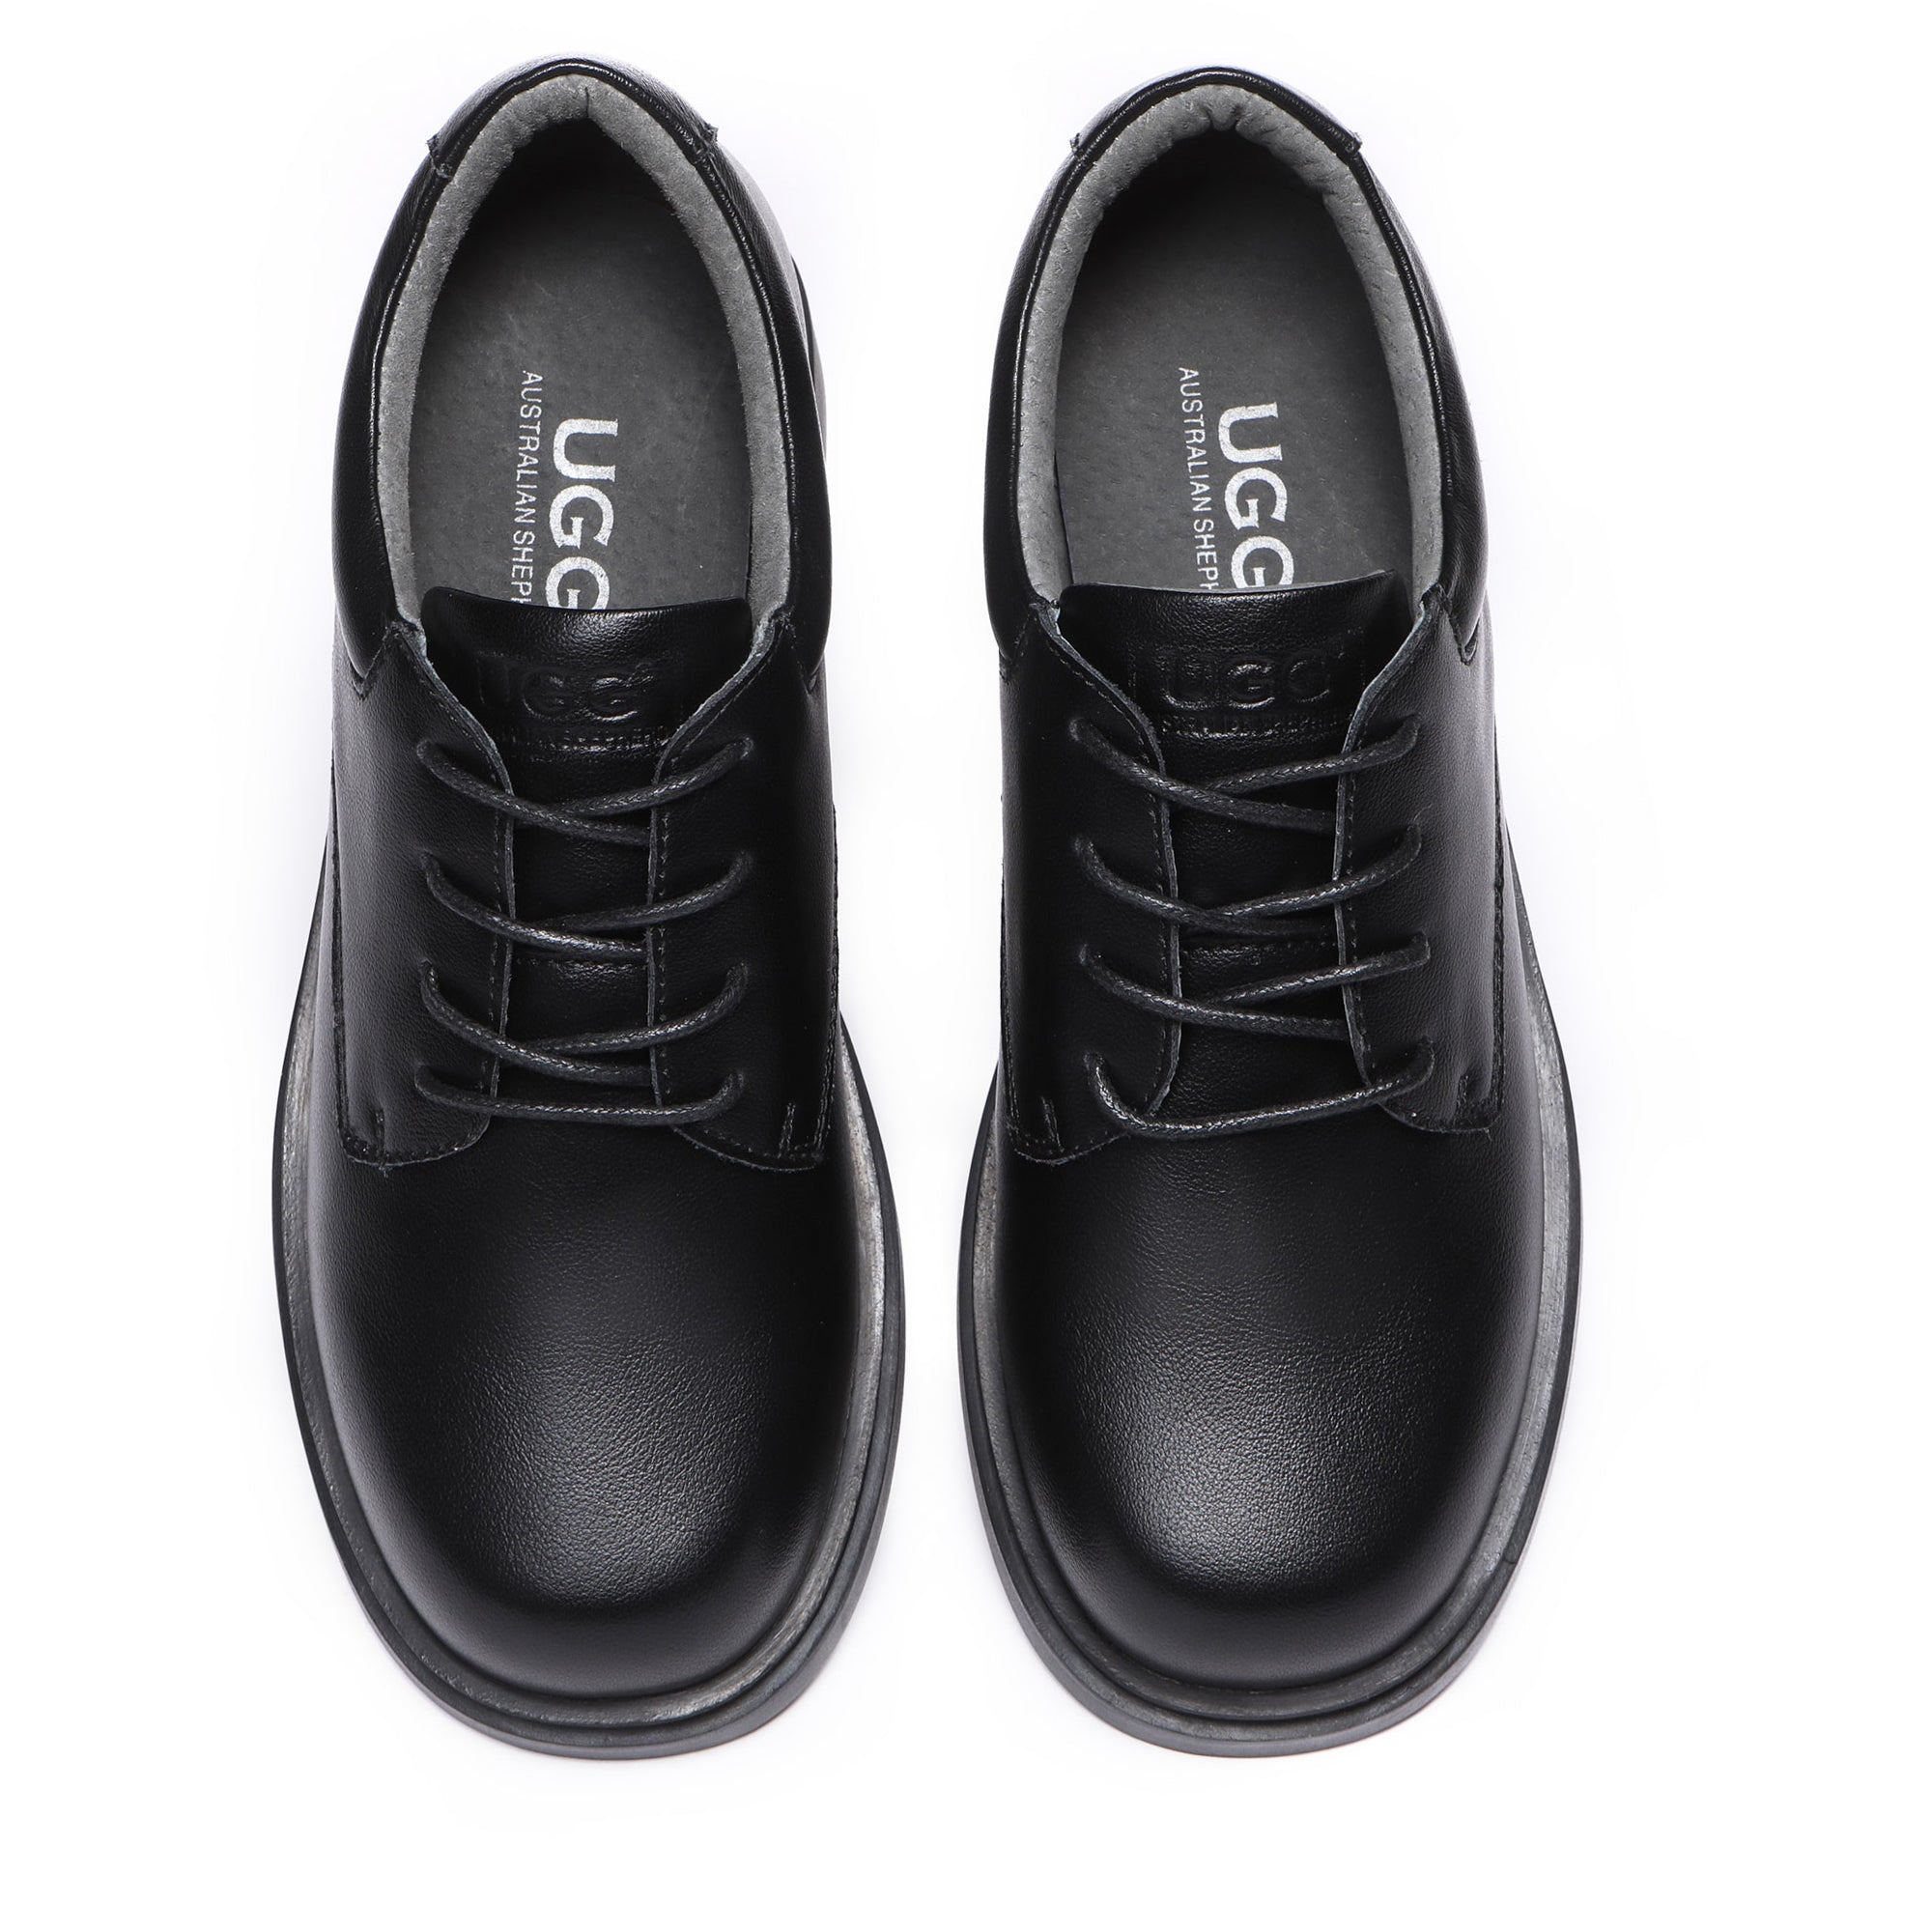 UGG Lace Up School Shoes